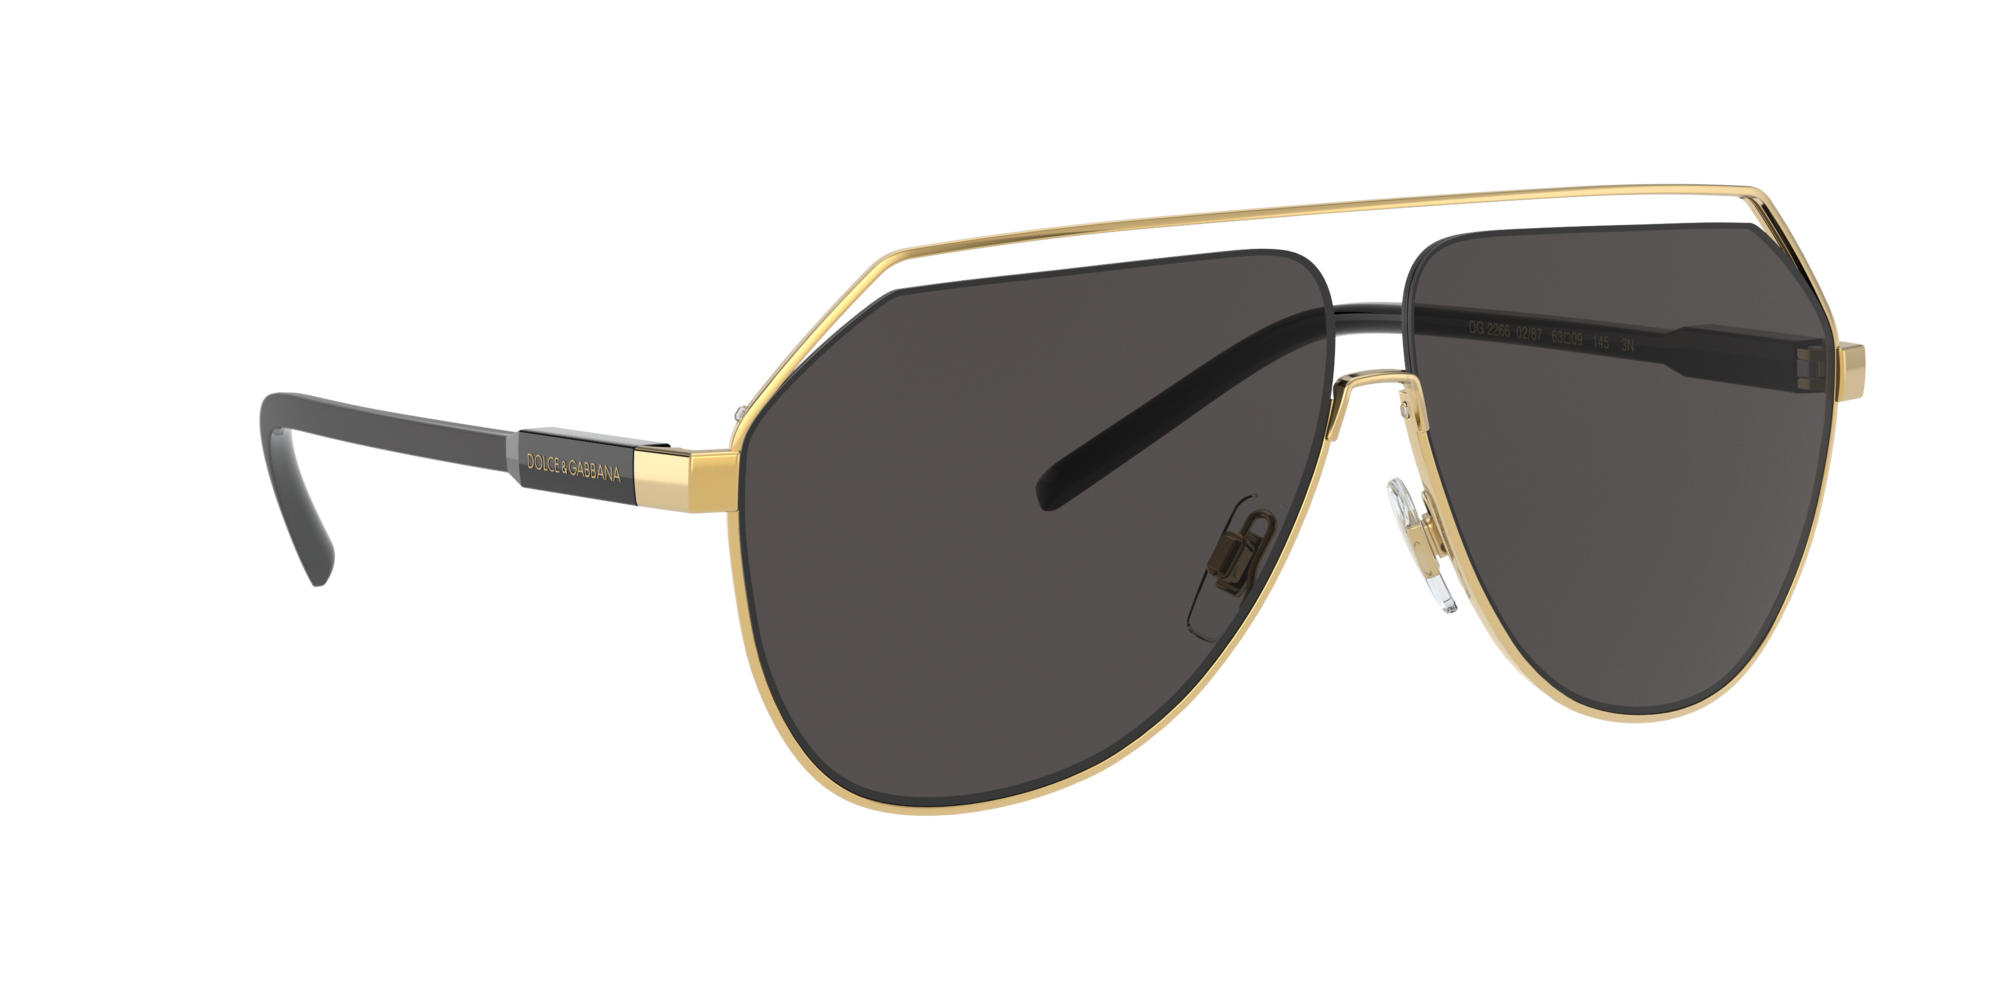 [products.image.angle_right01] DOLCE & GABBANA DG2266 02/87